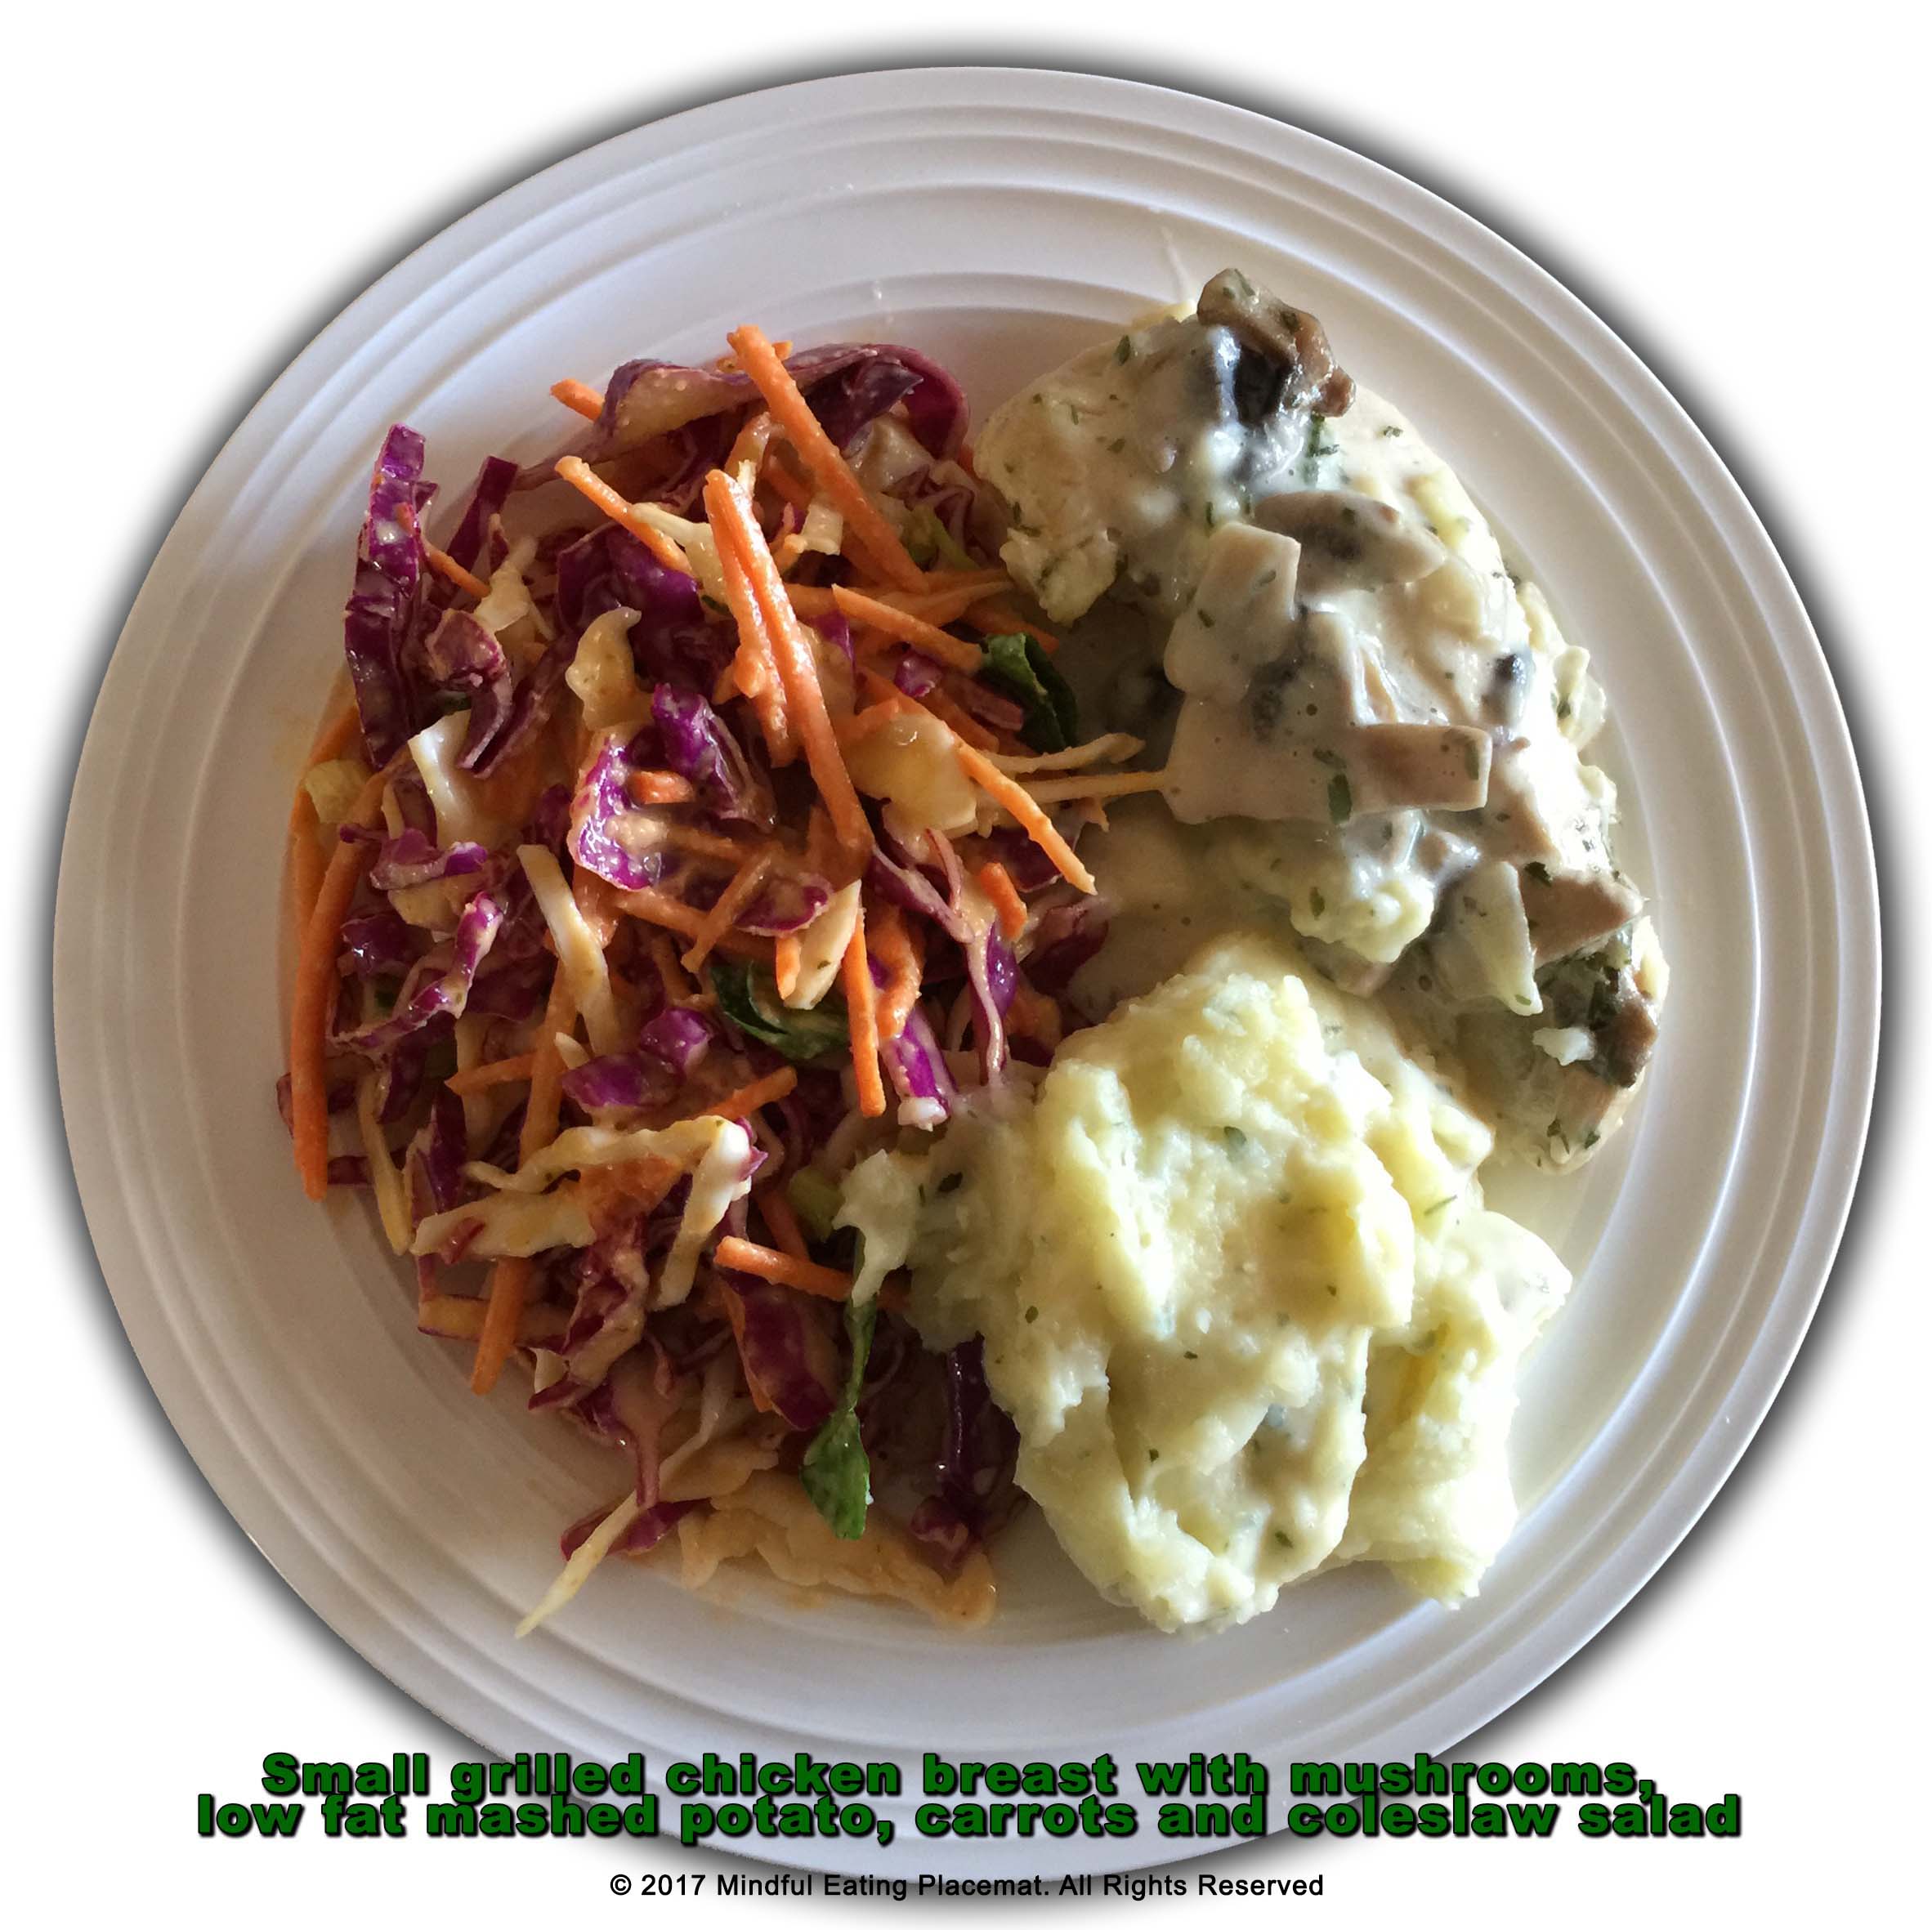 Grilled chicken with mushrooms mash and coleslaw salad